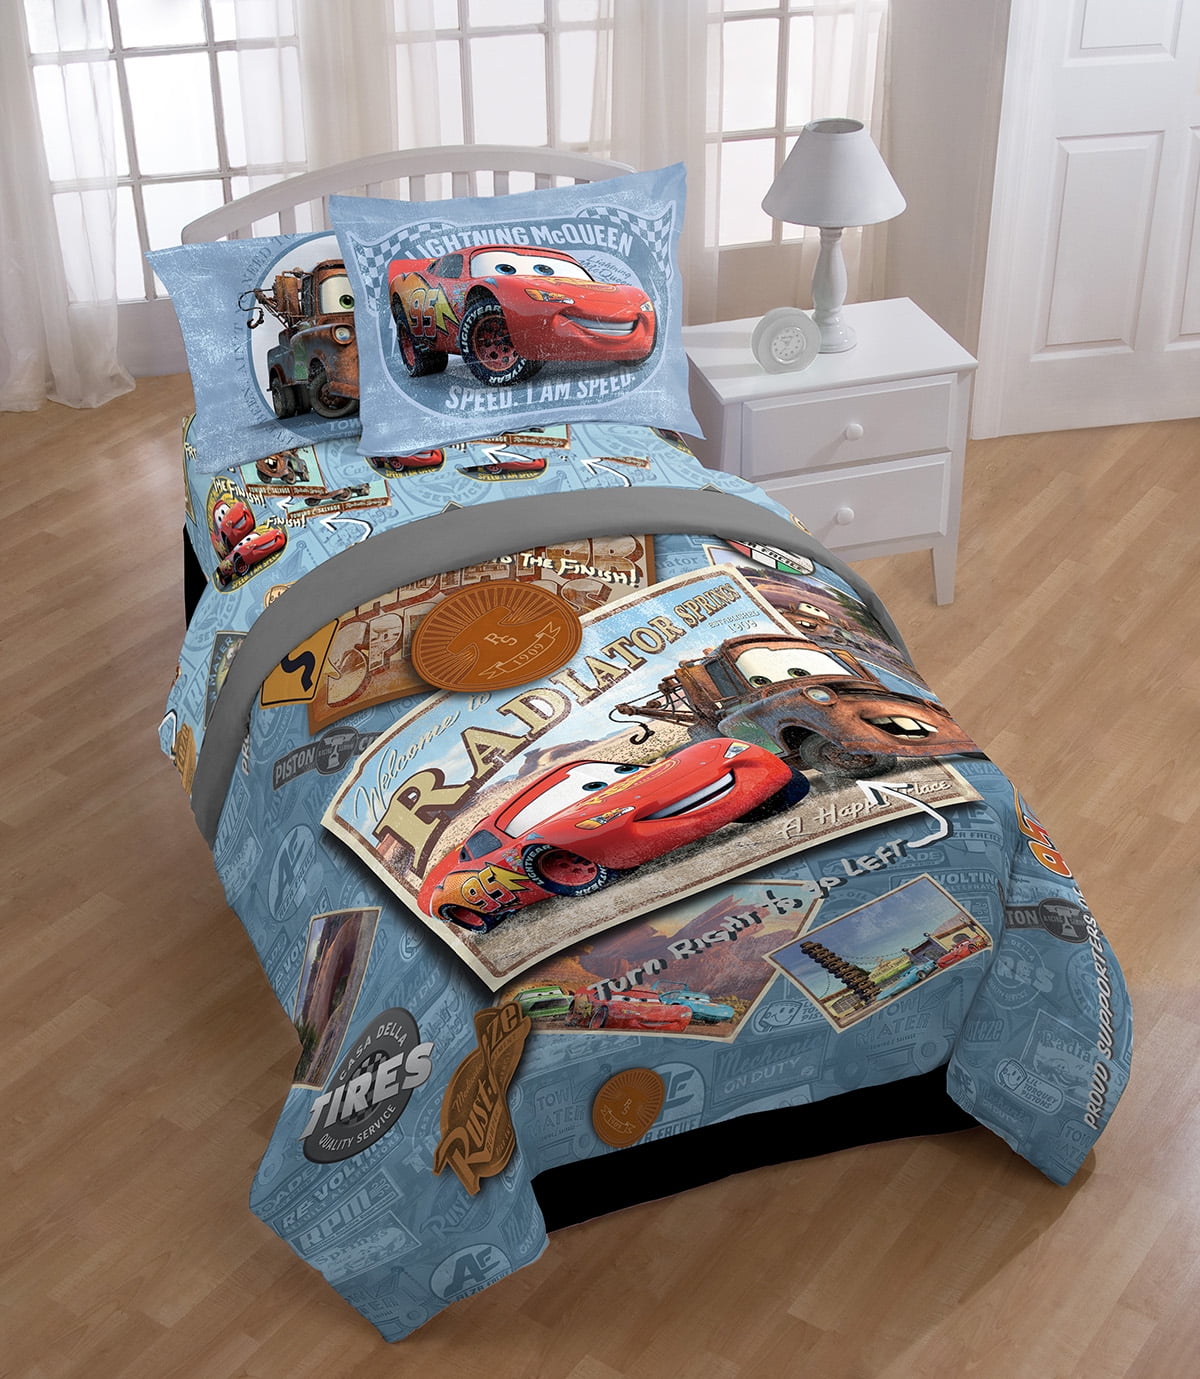 Disney Cars Tune Up Twin Bed In A Bag, Disney Bed In A Bag Twin